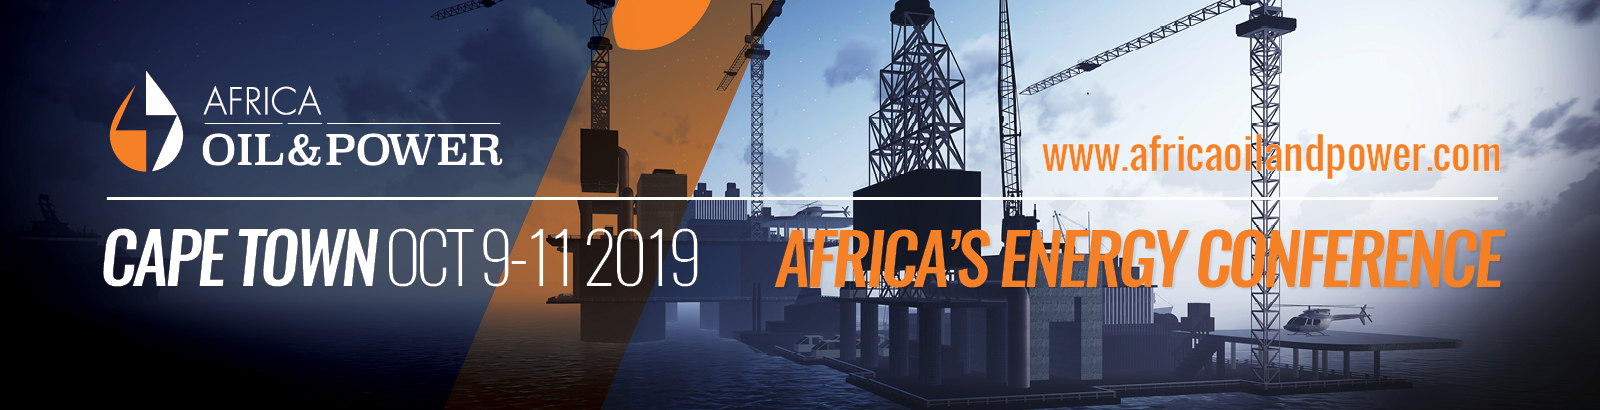 National oil companies to gather at 2019 Africa Oil & Power